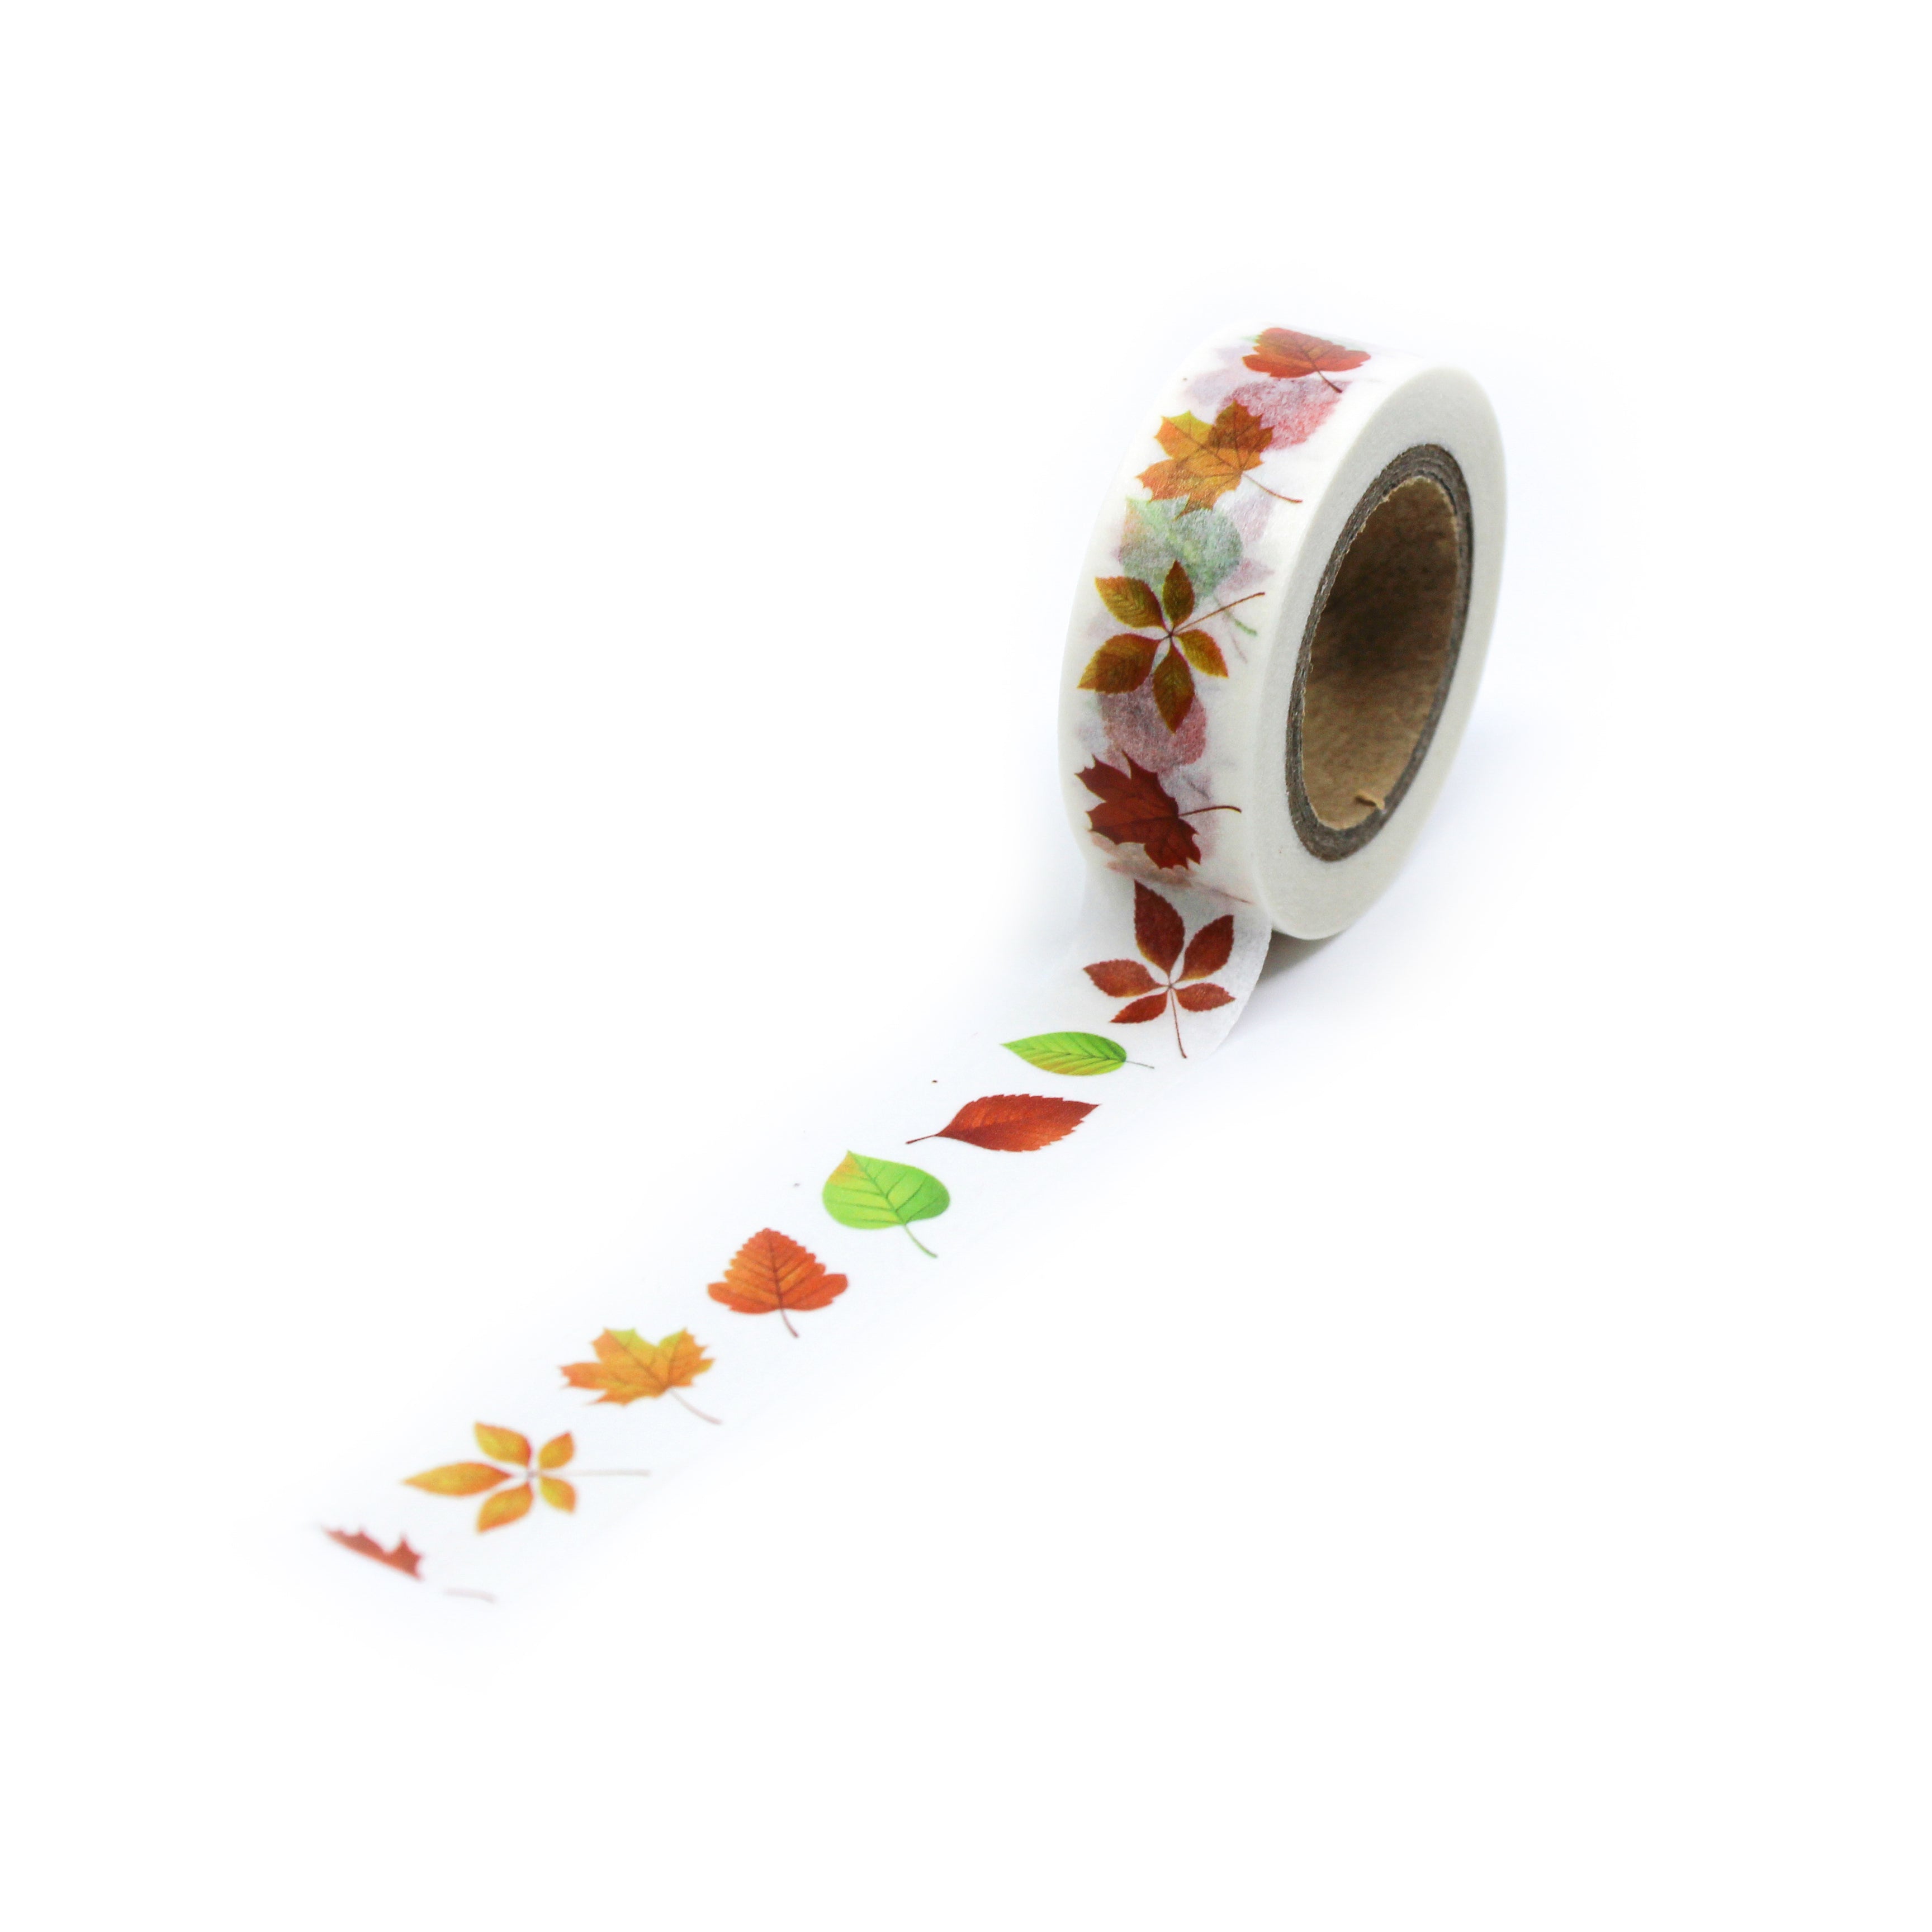 This is a full pattern repeat view of fall season leaf color washi tape from BBB Supplies Craft Shop